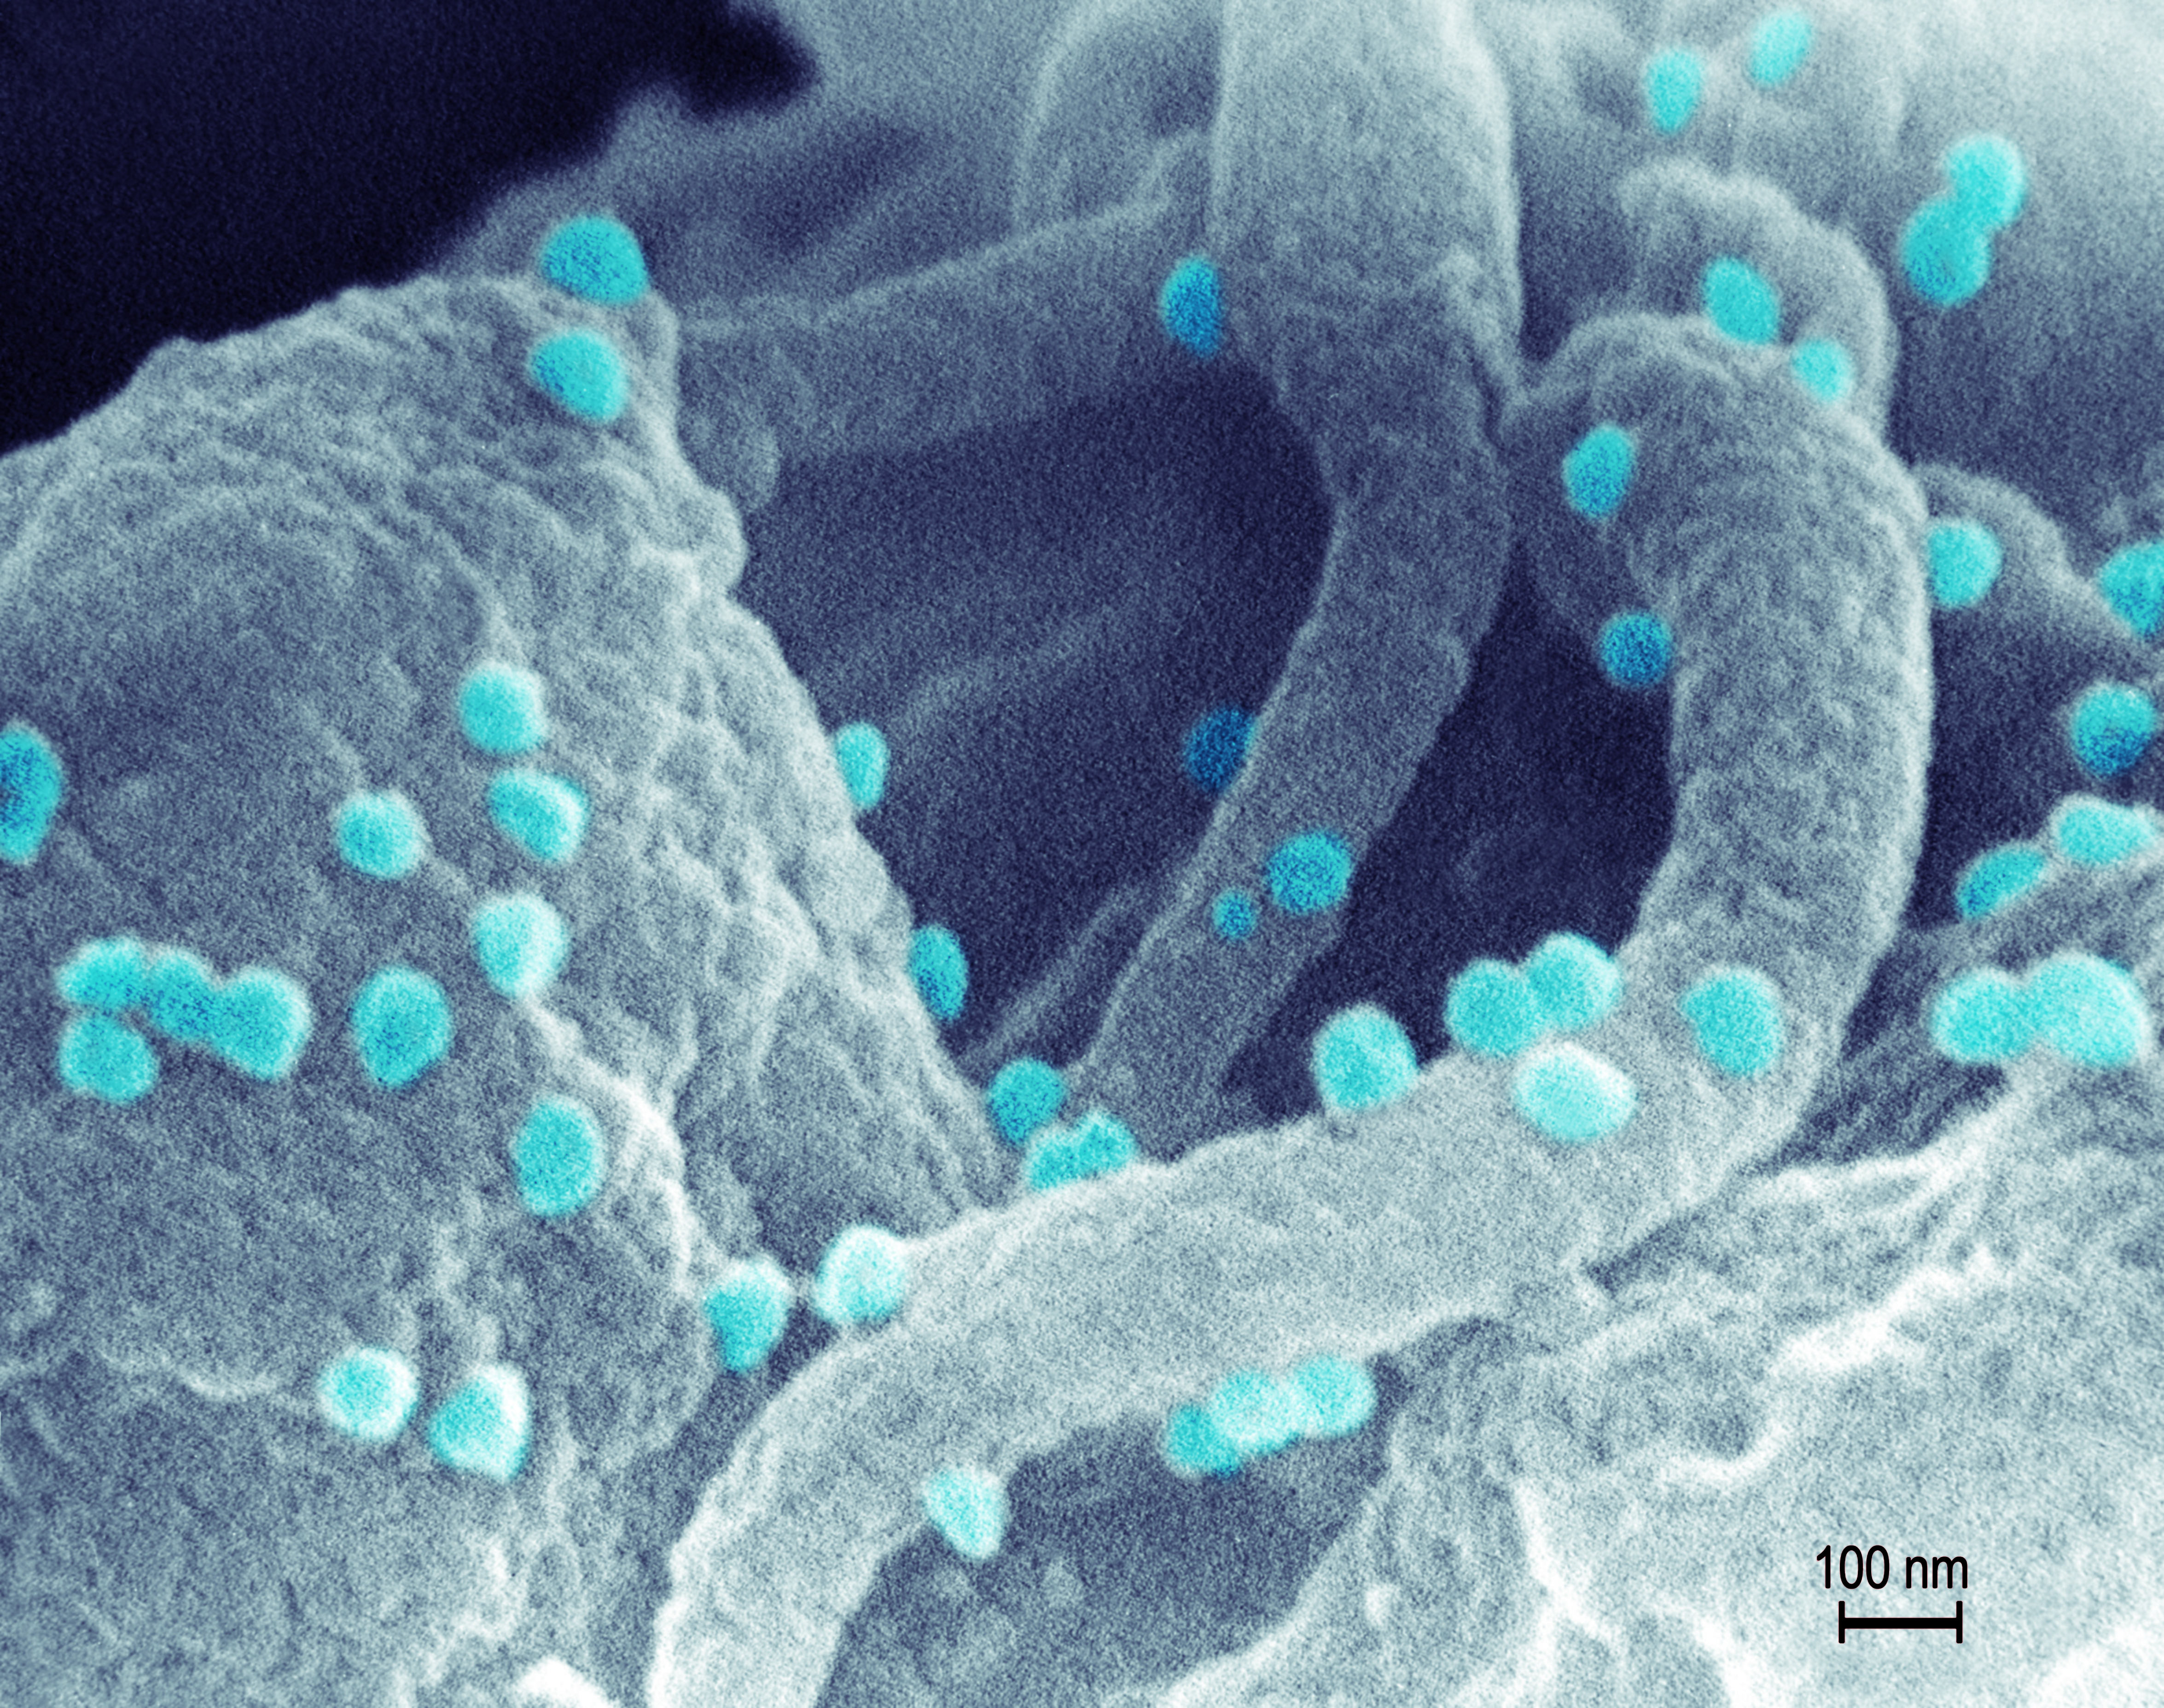 Scanning electron micrograph of HIV-1